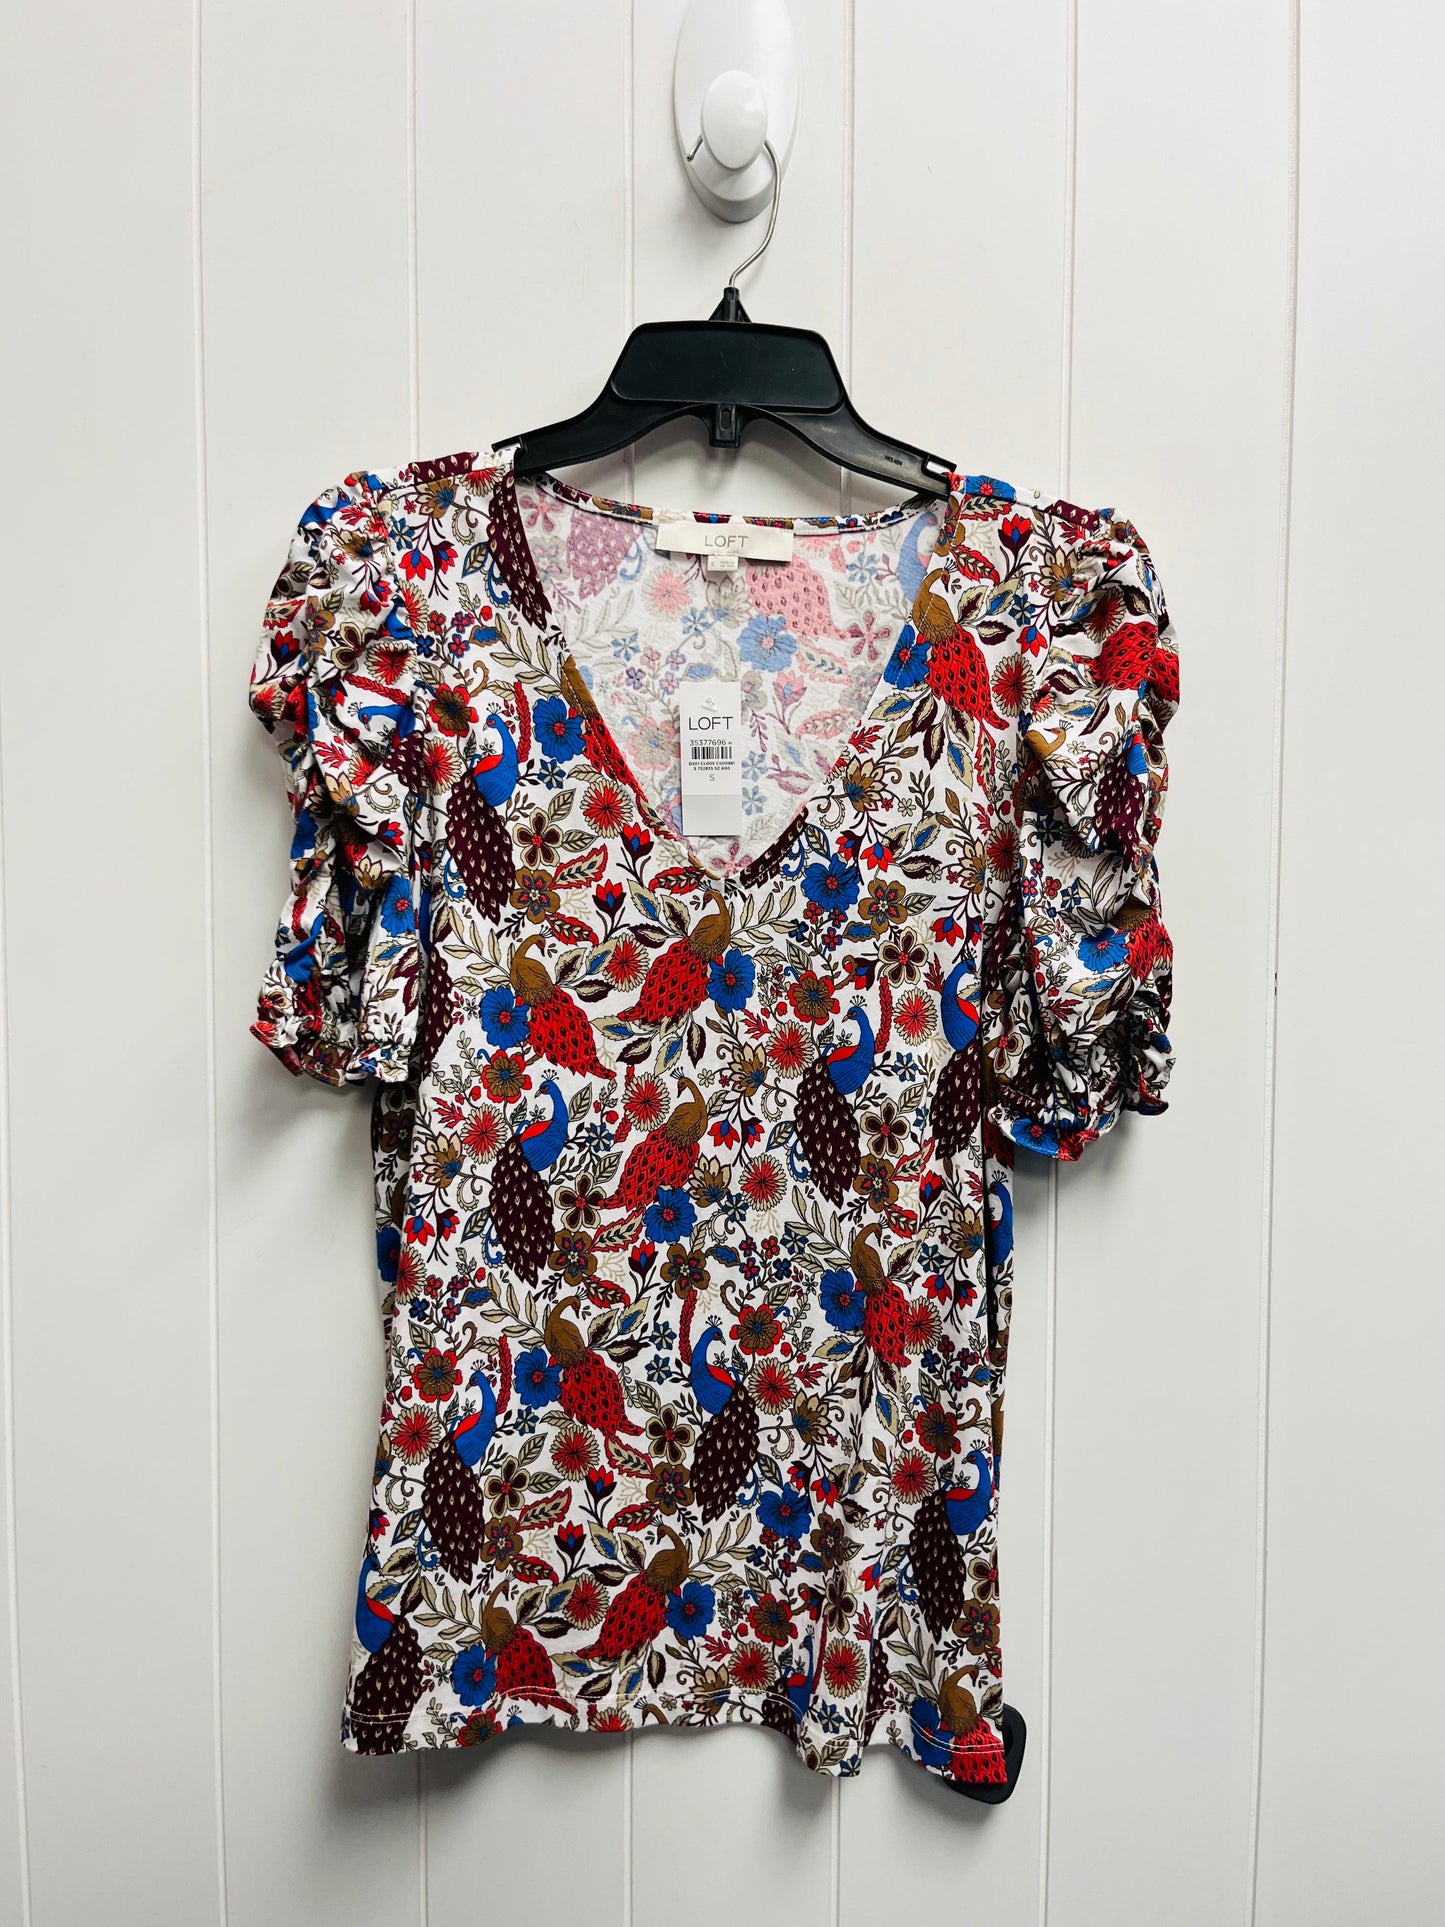 Blue & Red Top Short Sleeve Loft, Size S